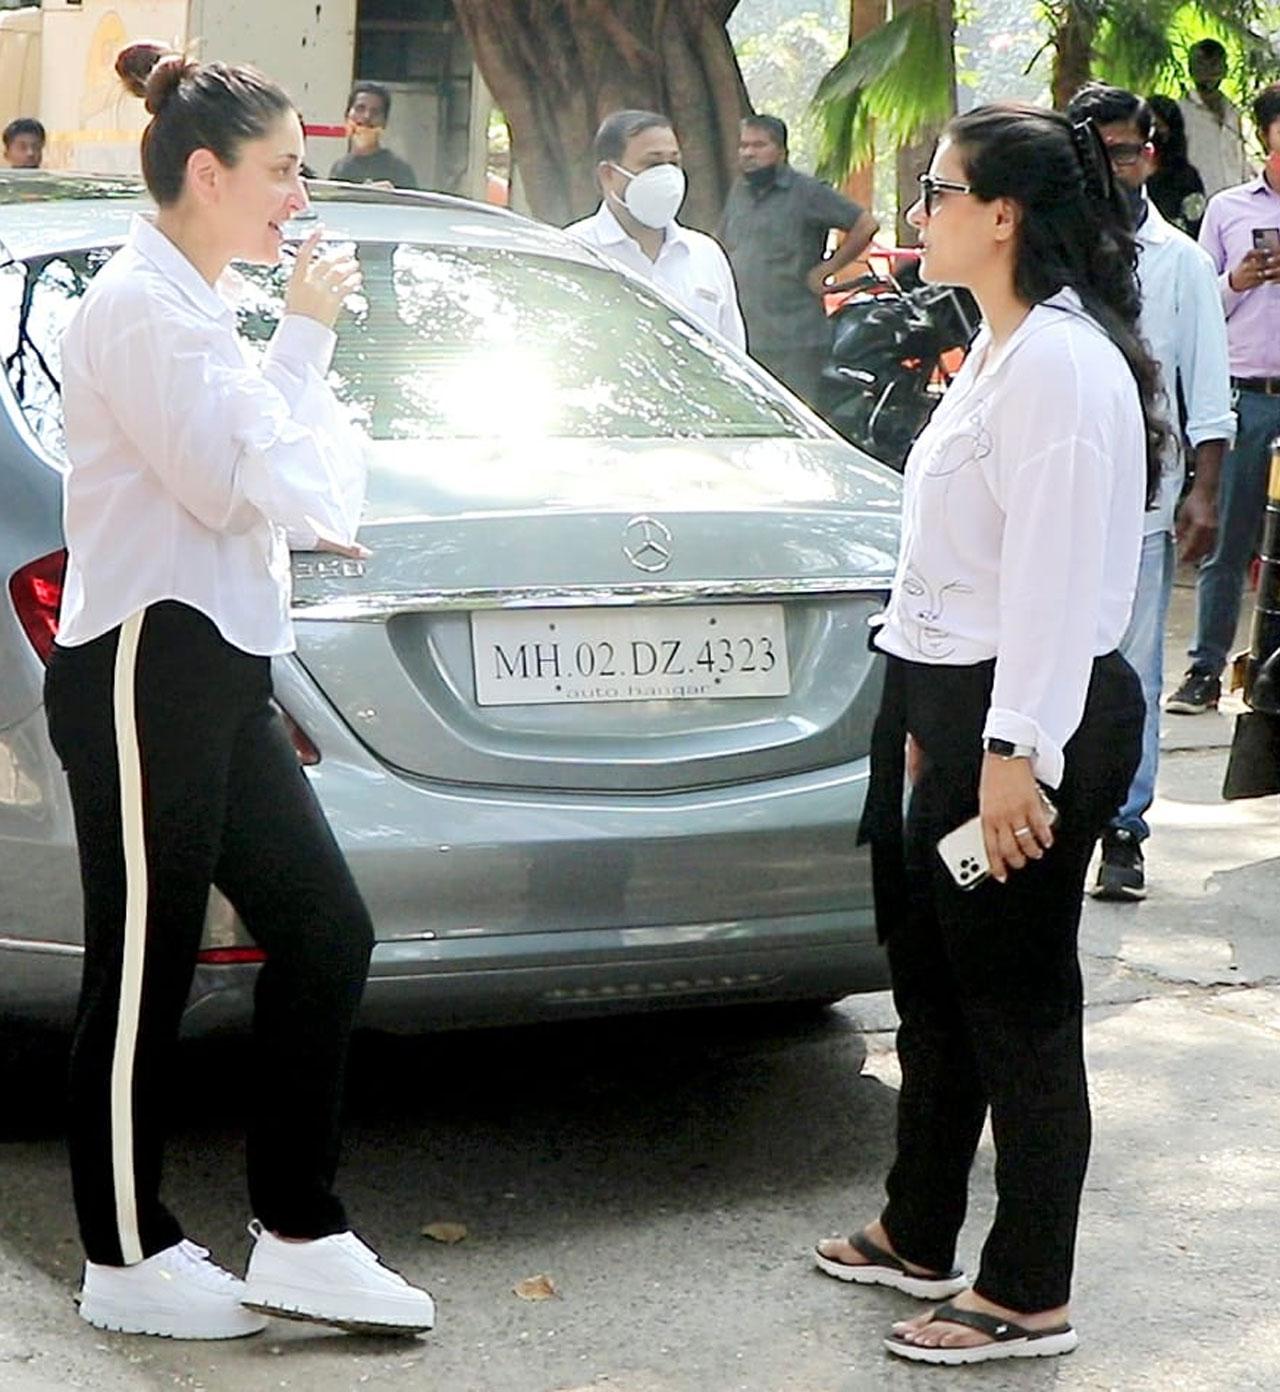 Kareena then asked Kajol about her COVID-19 battle. To which, Kajol replied, 